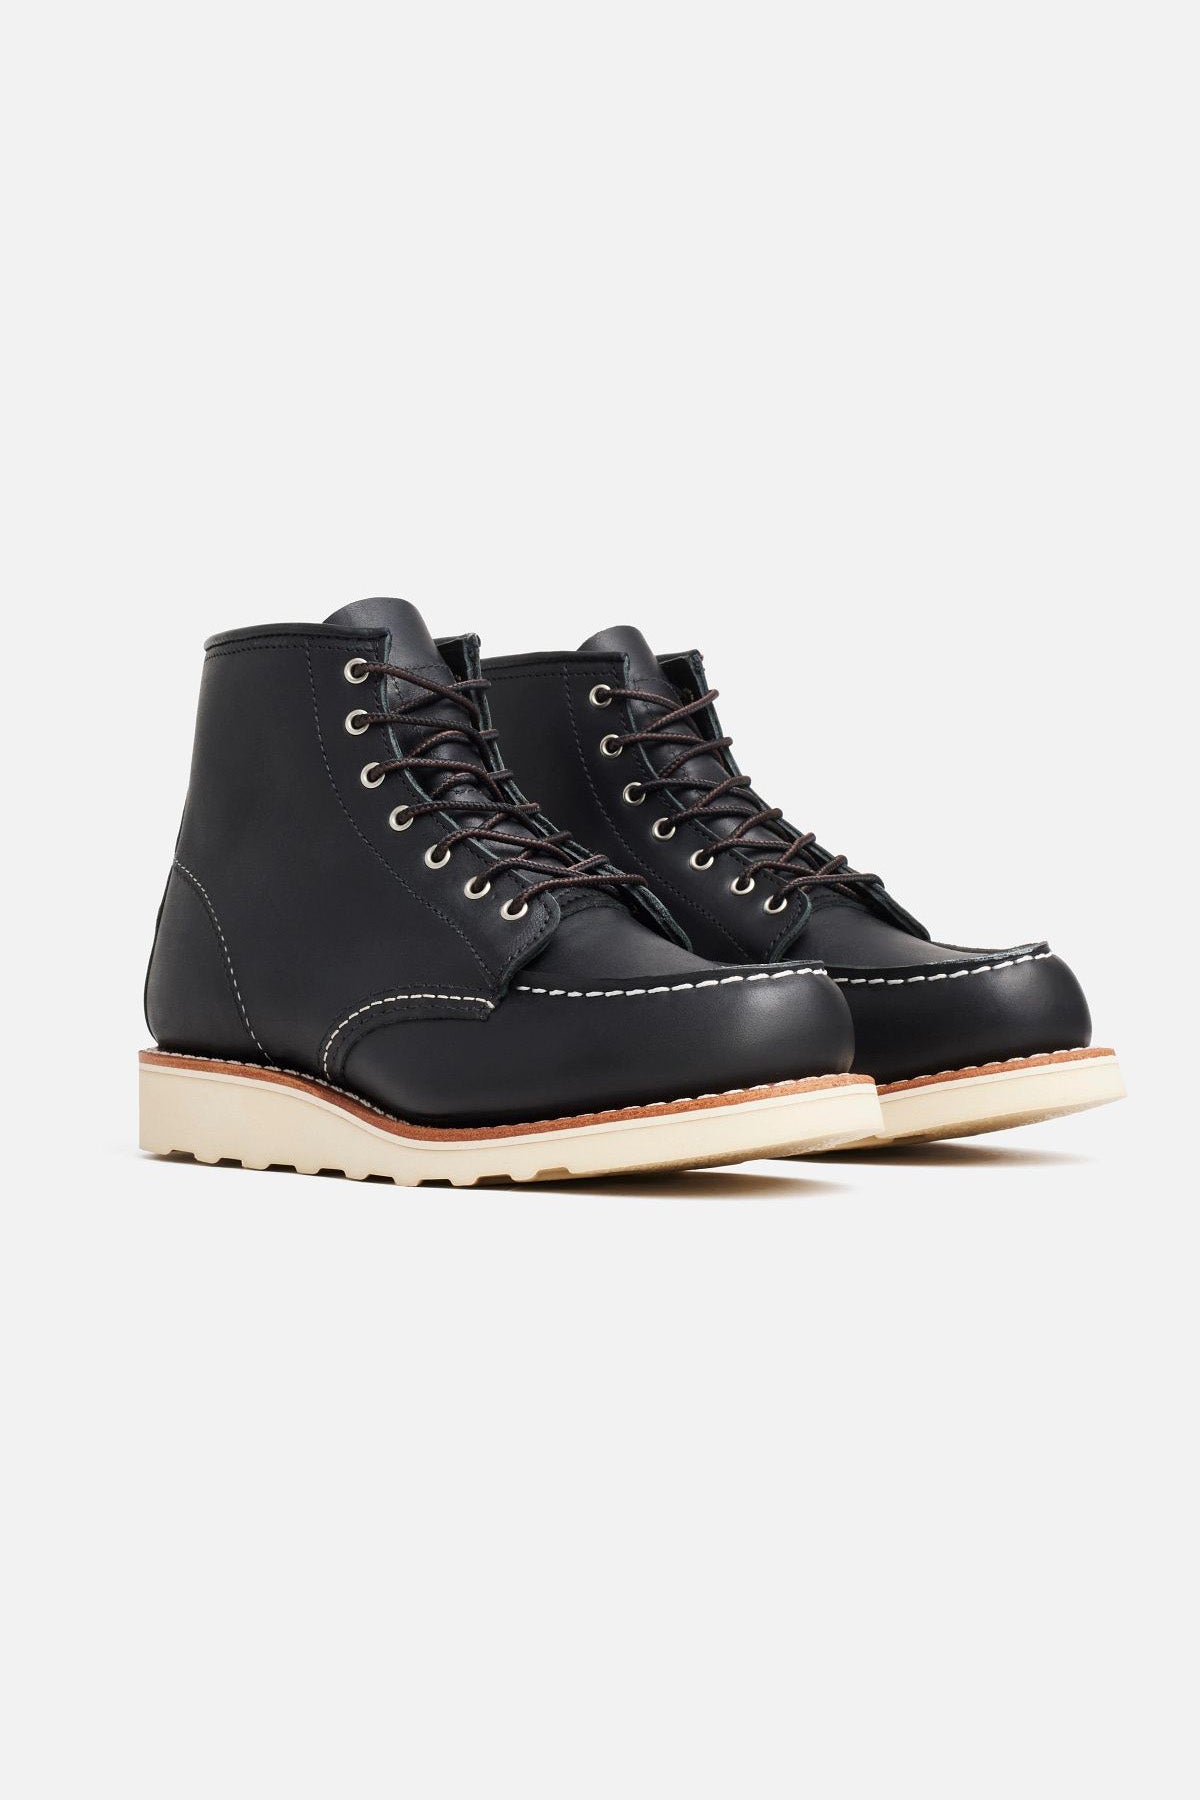 Red Wing - 6 Inch Moc Toe - Black/White - Profile